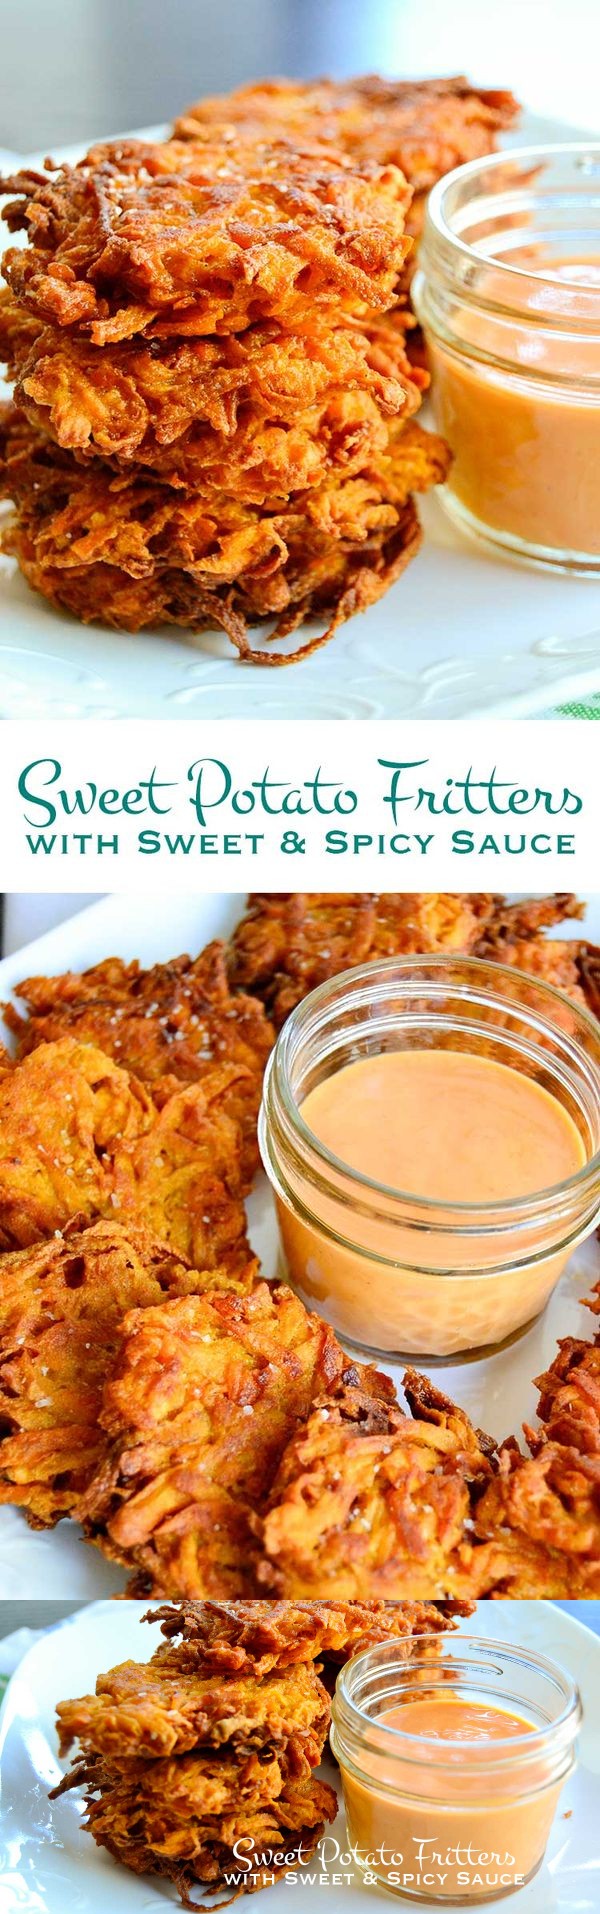 Sweet Potato Fritters with Sweet & Spicy Sauce